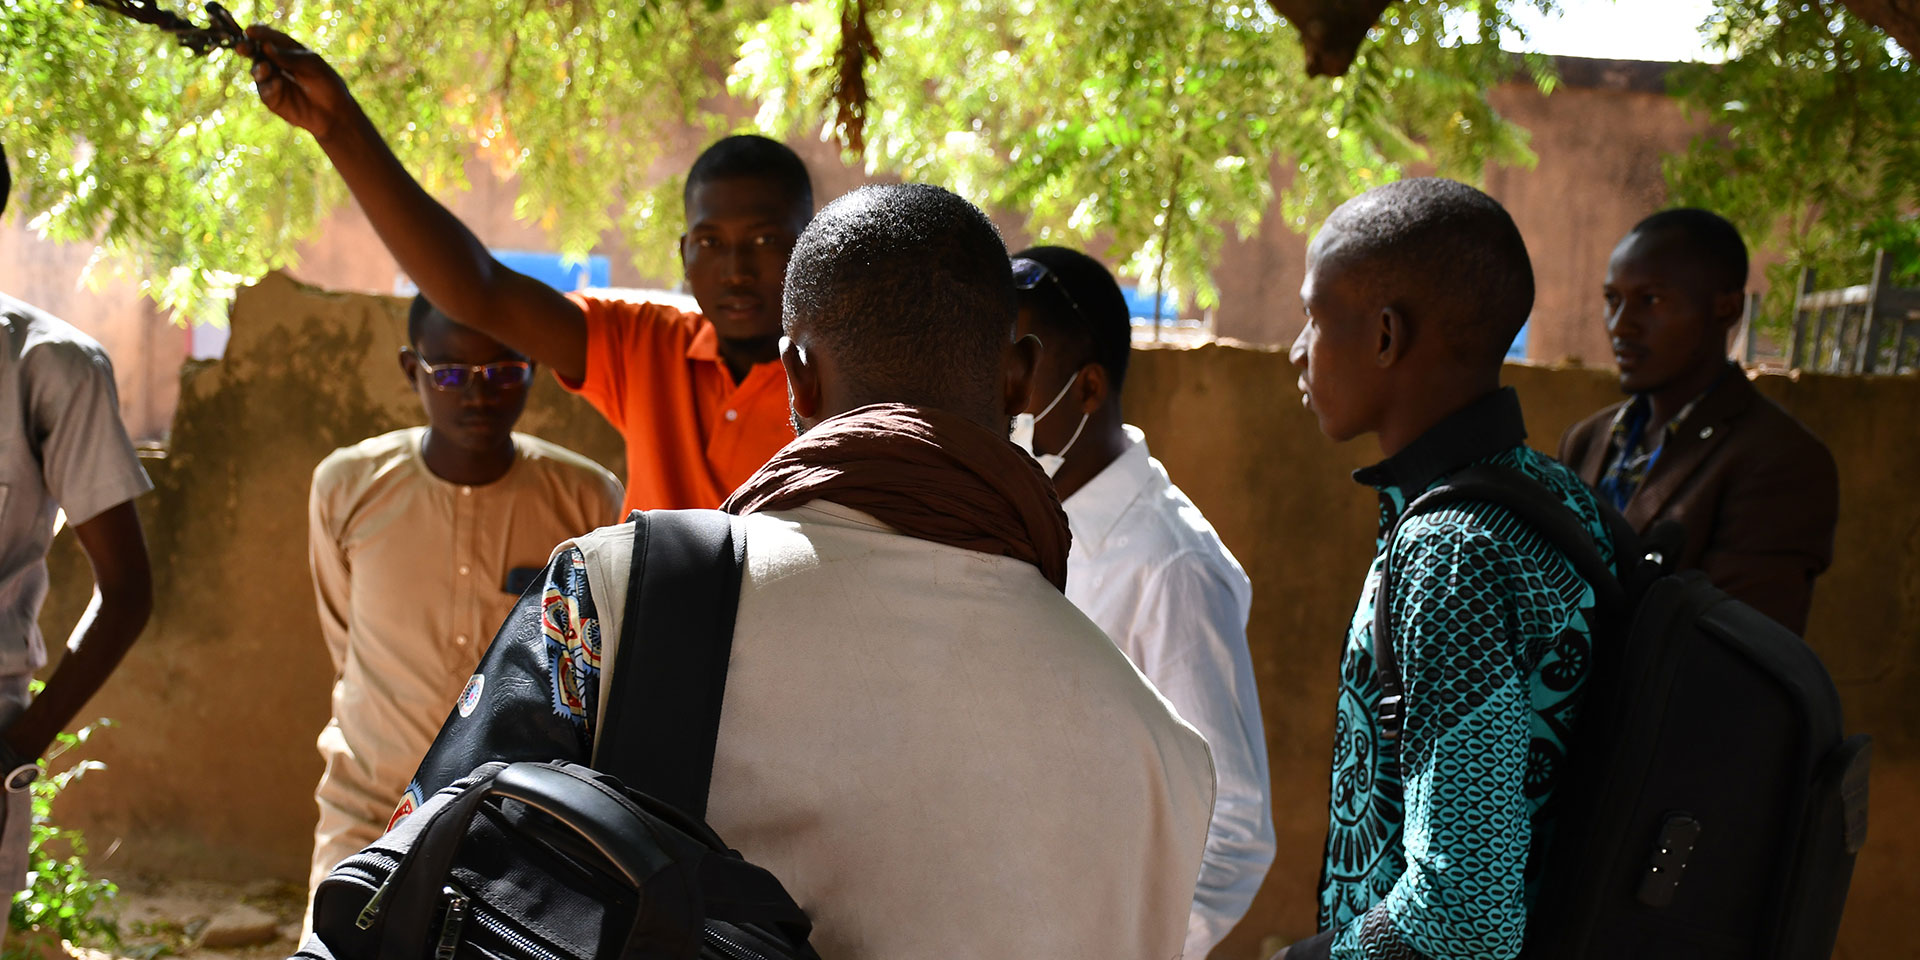 A group of people discuss in Niger.